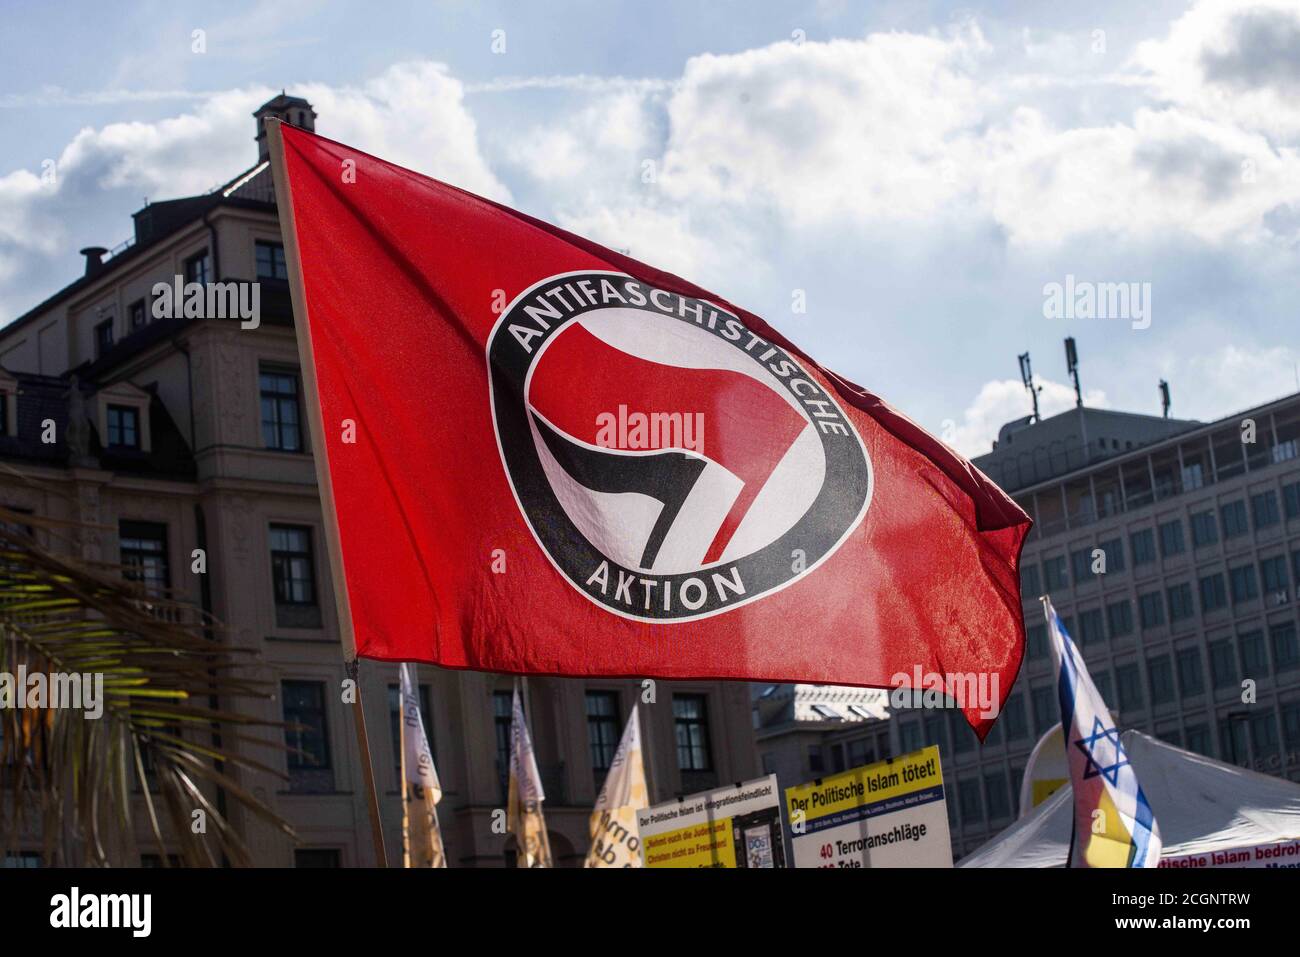 September 11, 2020, Munich, Bavaria, Germany: The far- to extreme-right group Buergerbewegung Pax Europa (Citizen Movement Pax Europa) led by the islamophobe Michael Stuerzenberger (Michael StÃ¼rzenberger) returned to Munichâ€™s Stachus after a long absence. (Credit Image: © Sachelle Babbar/ZUMA Wire) Stock Photo